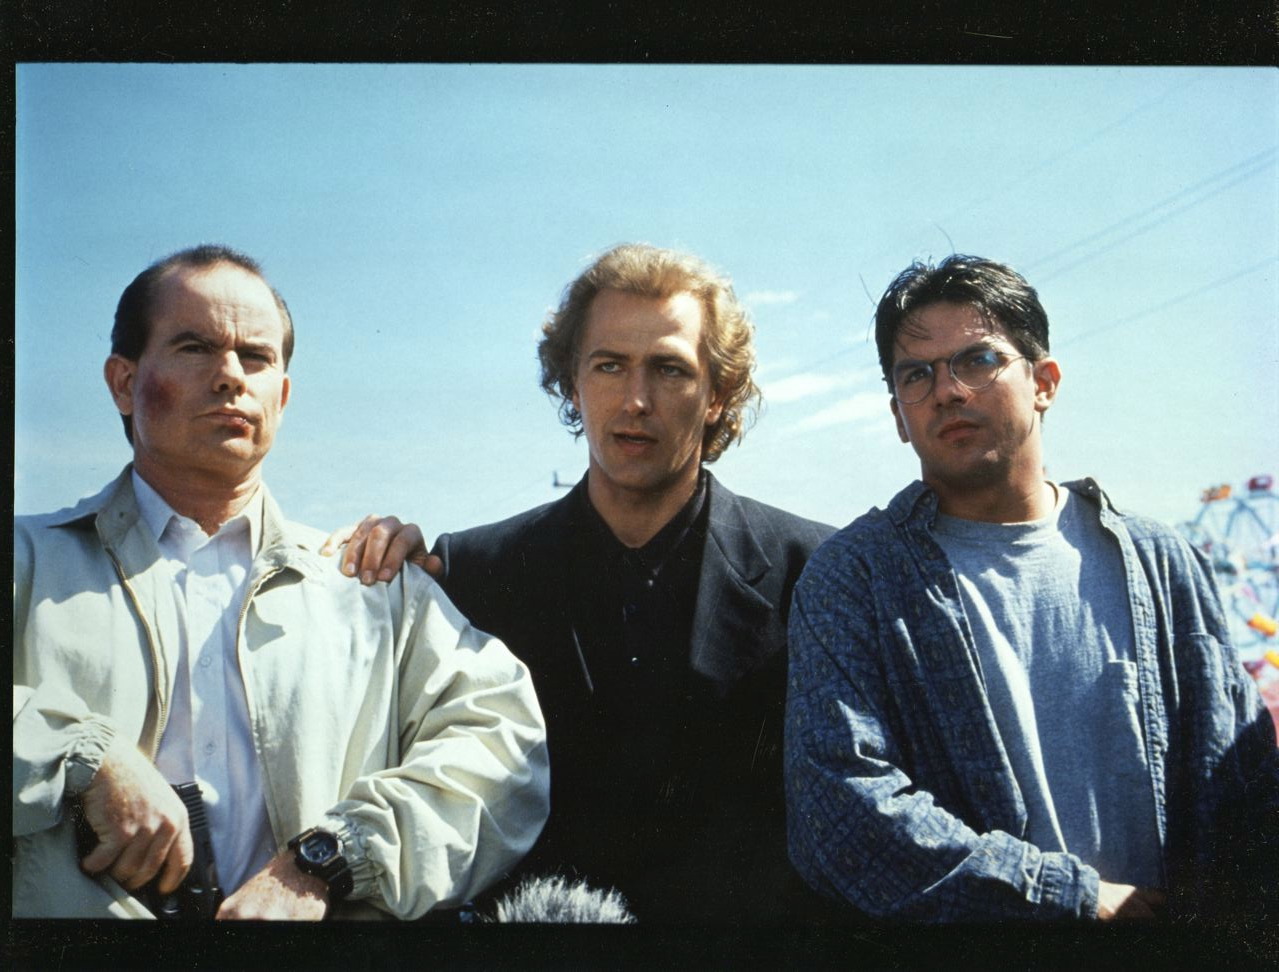 Marc Macaulay (as Vincent), Bruce Payne (as Charles Rane), and Cameron Roberts (as Mathew) in Passenger 57.